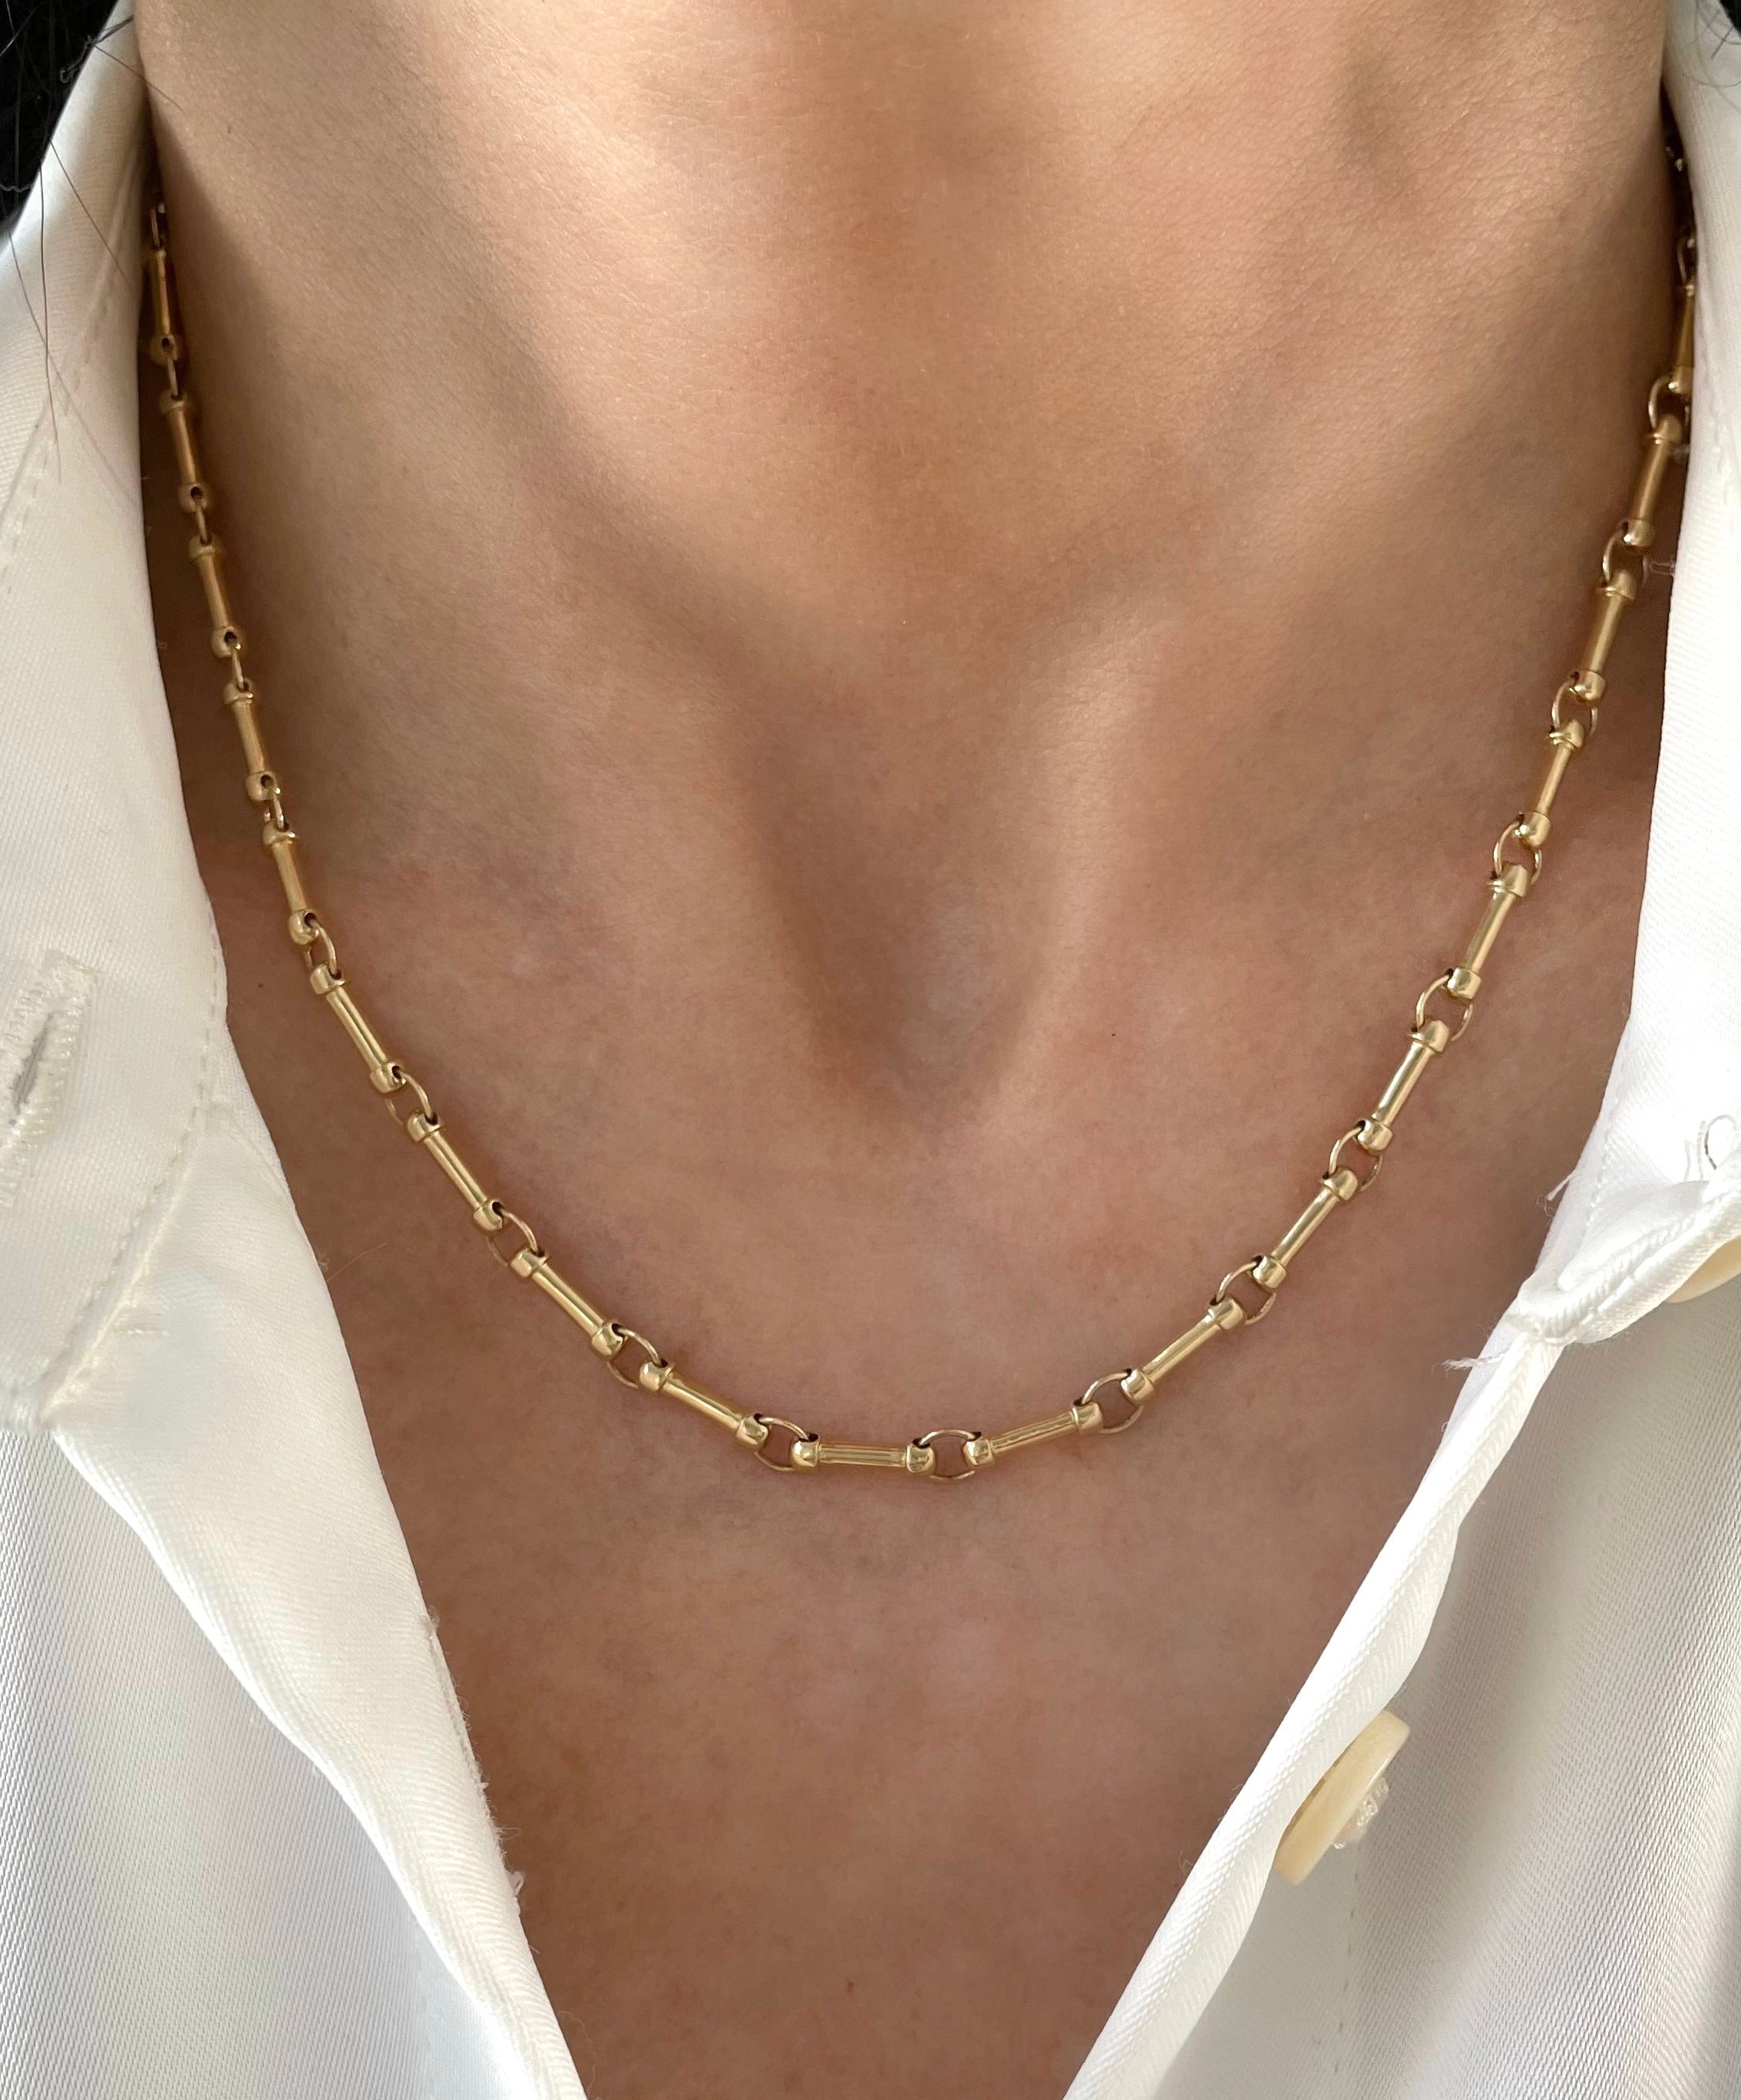 Gold Link Chain - SAMPLE SALE